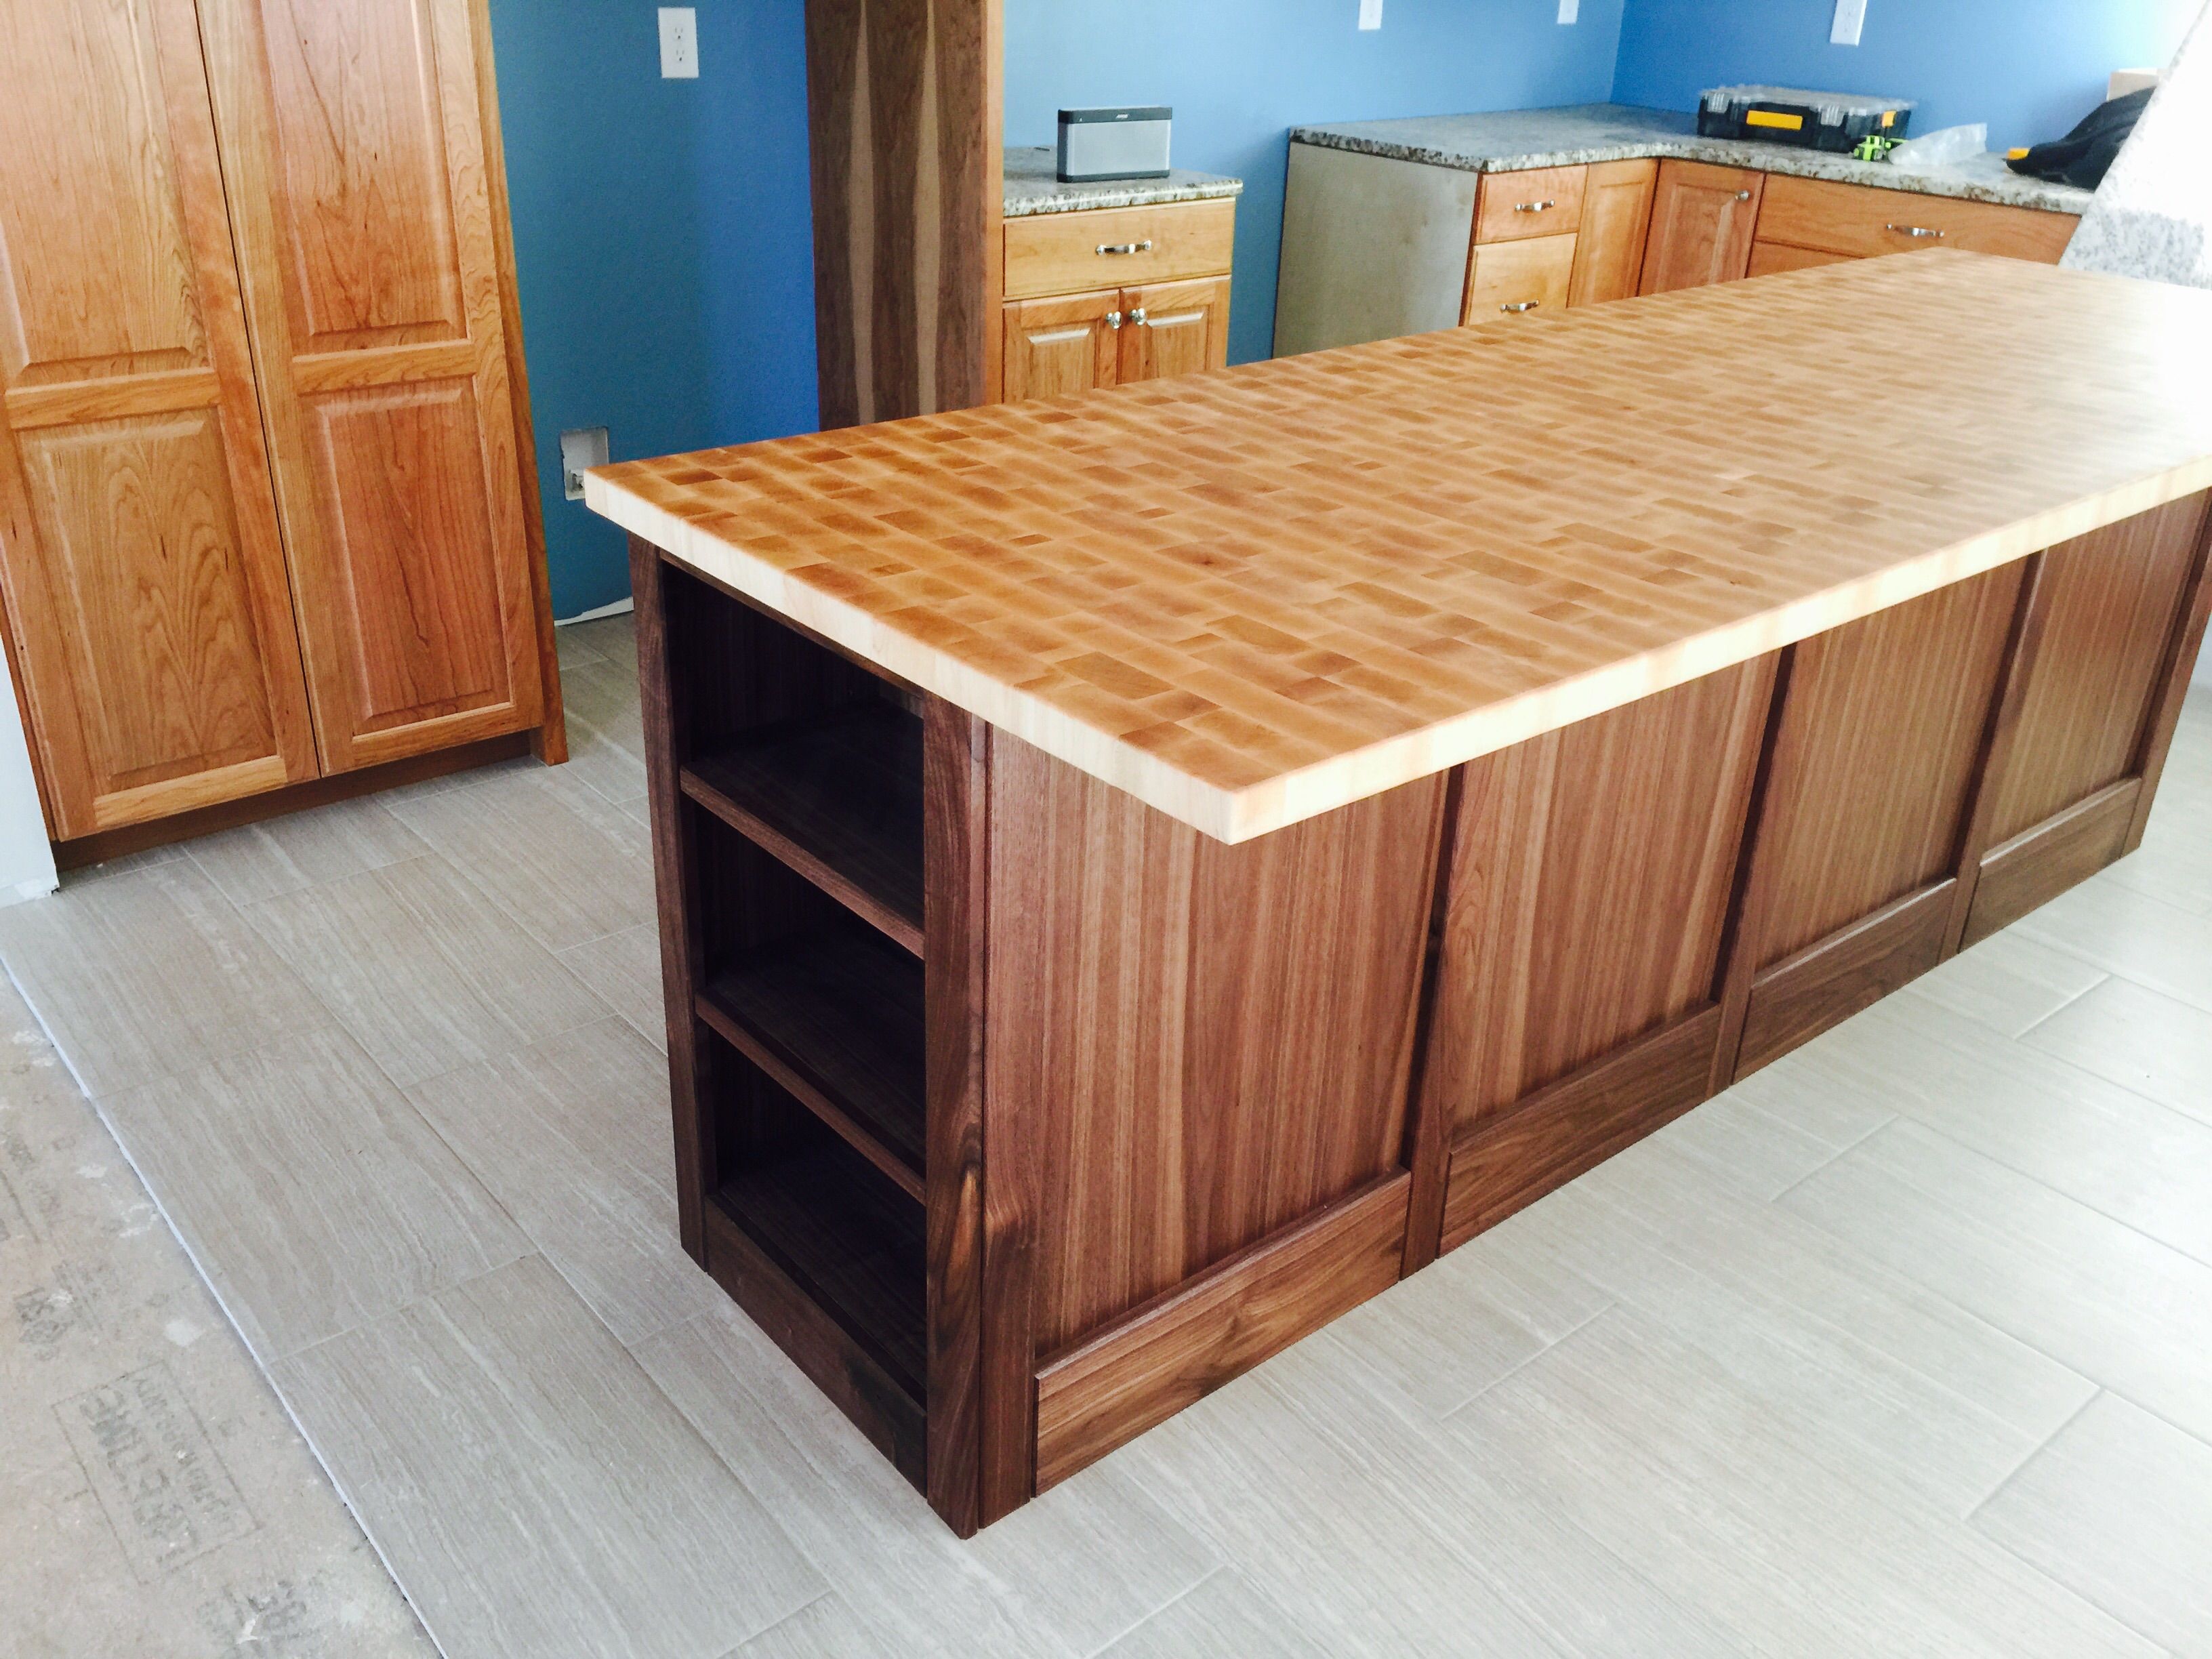 made in thailand butcher block kitchen table